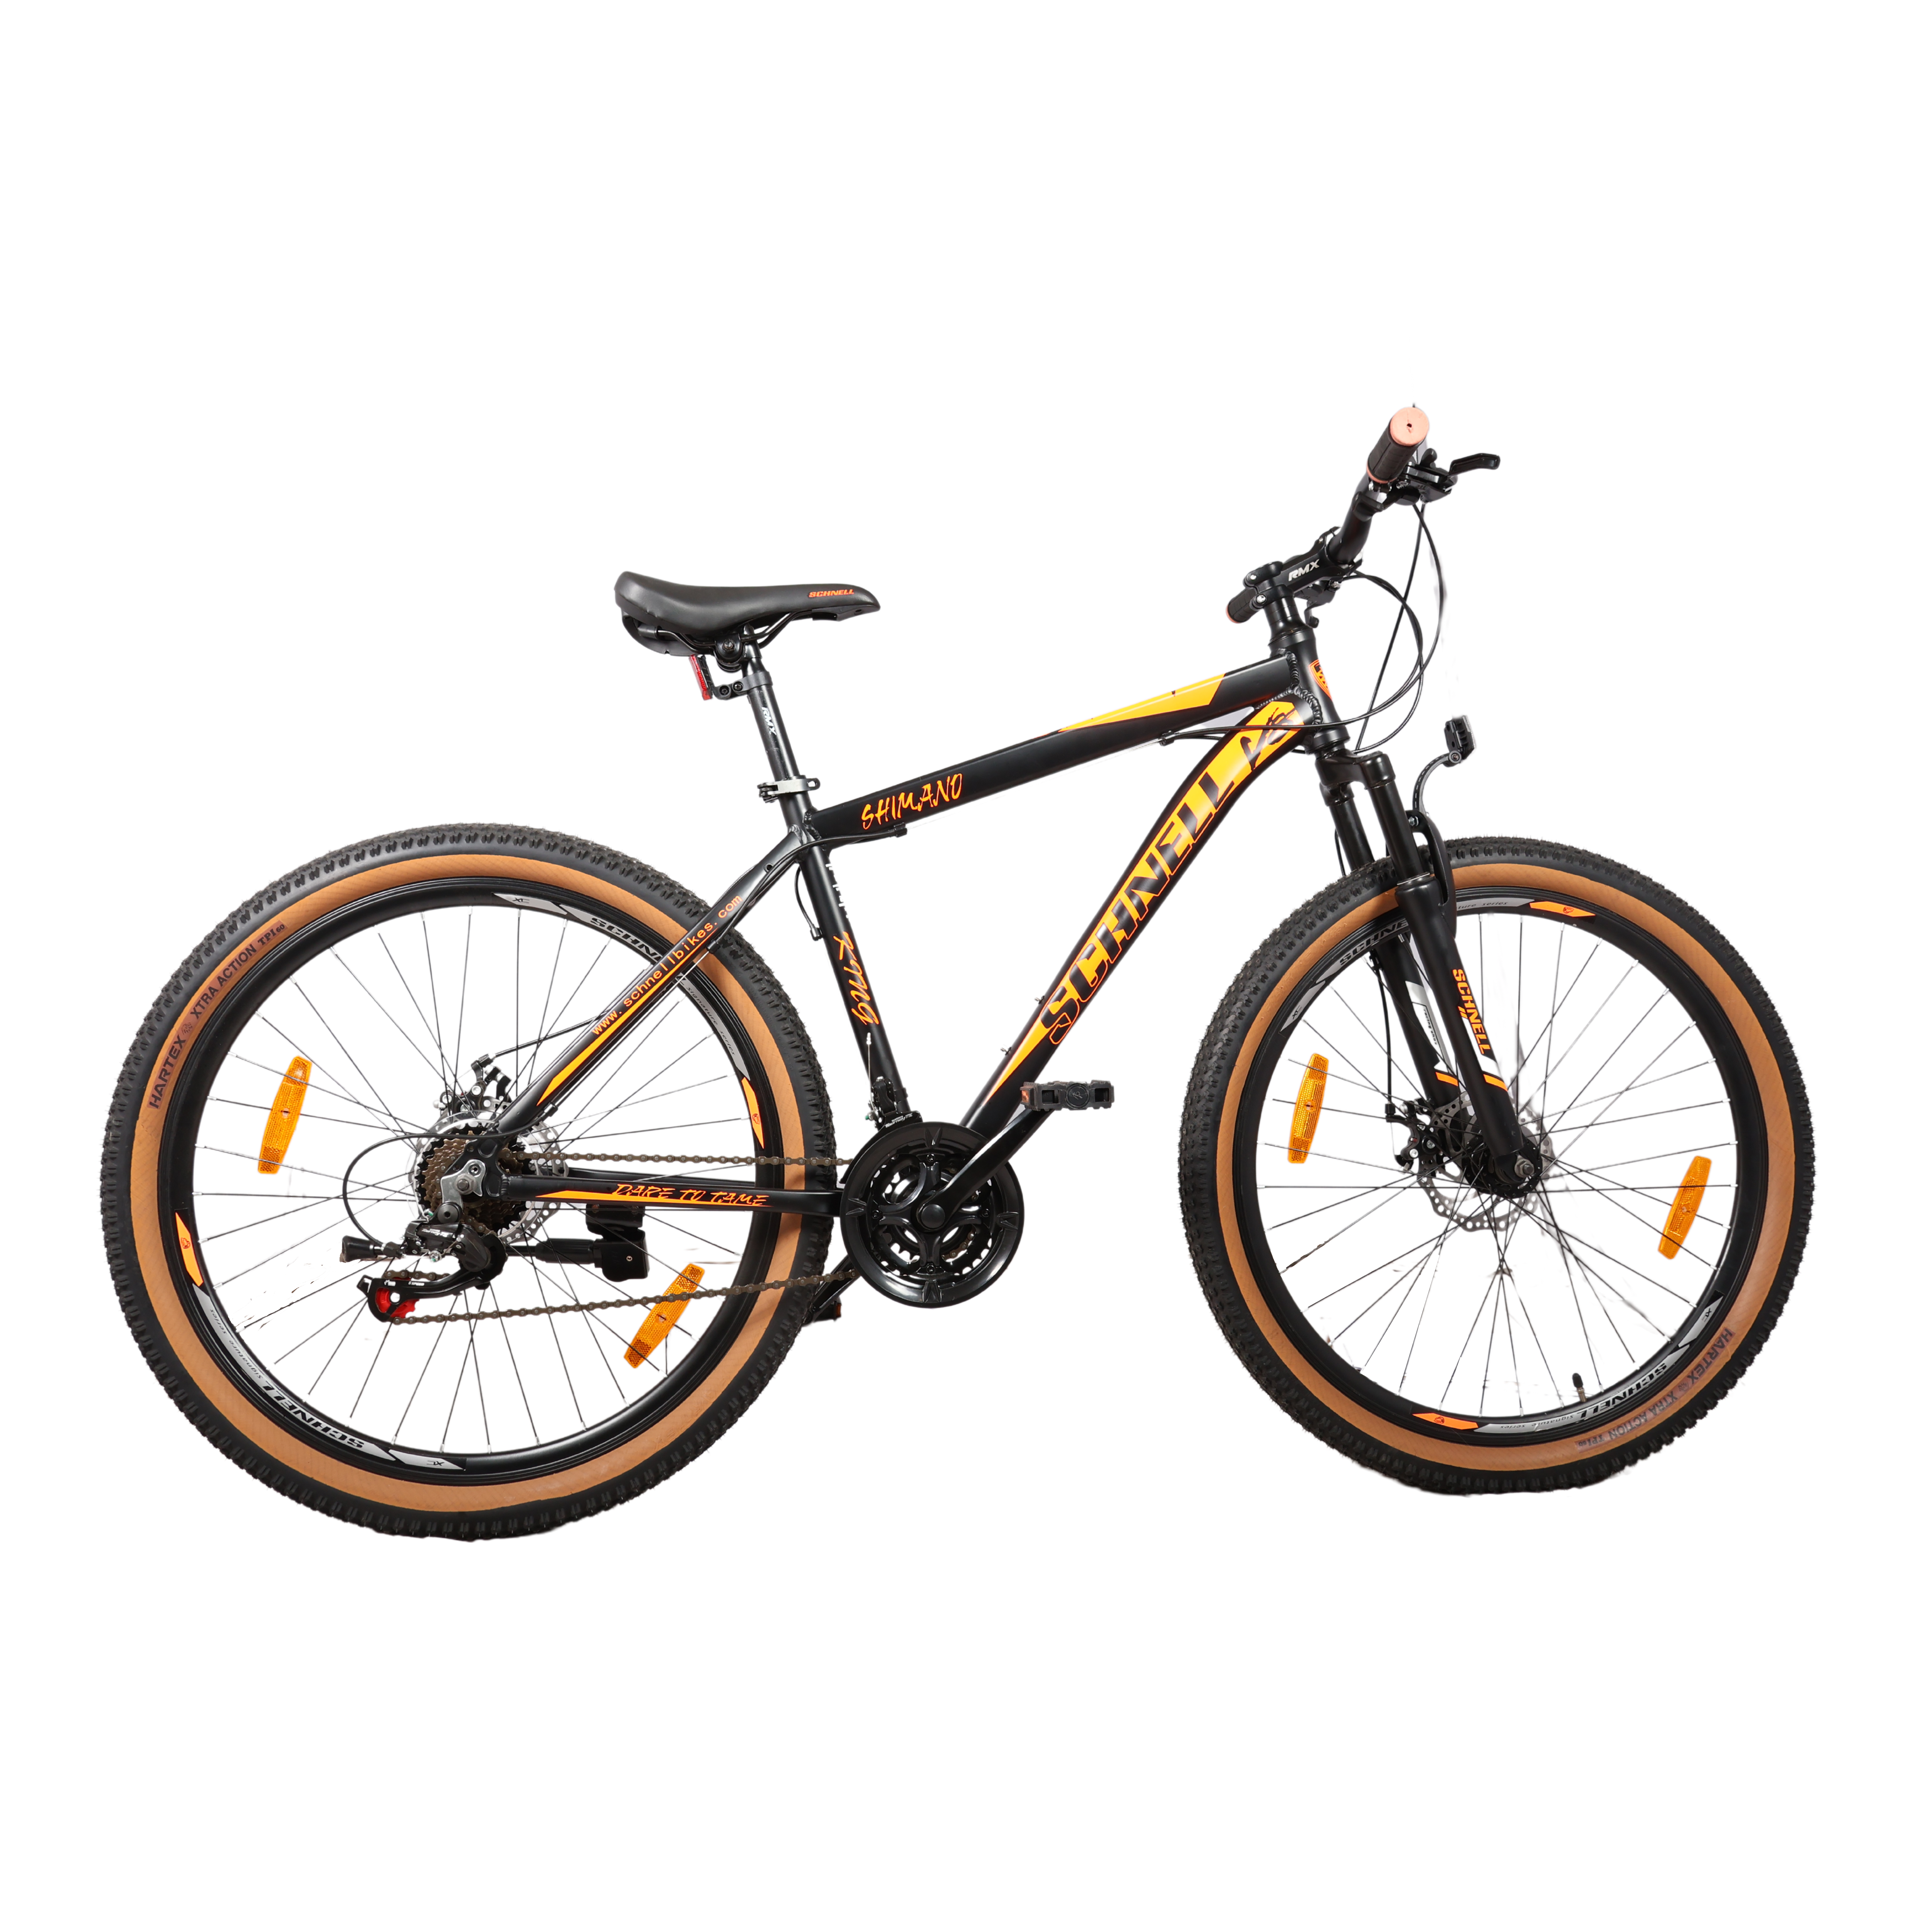 SCHNELL KING 27.5 MS (BLACK)